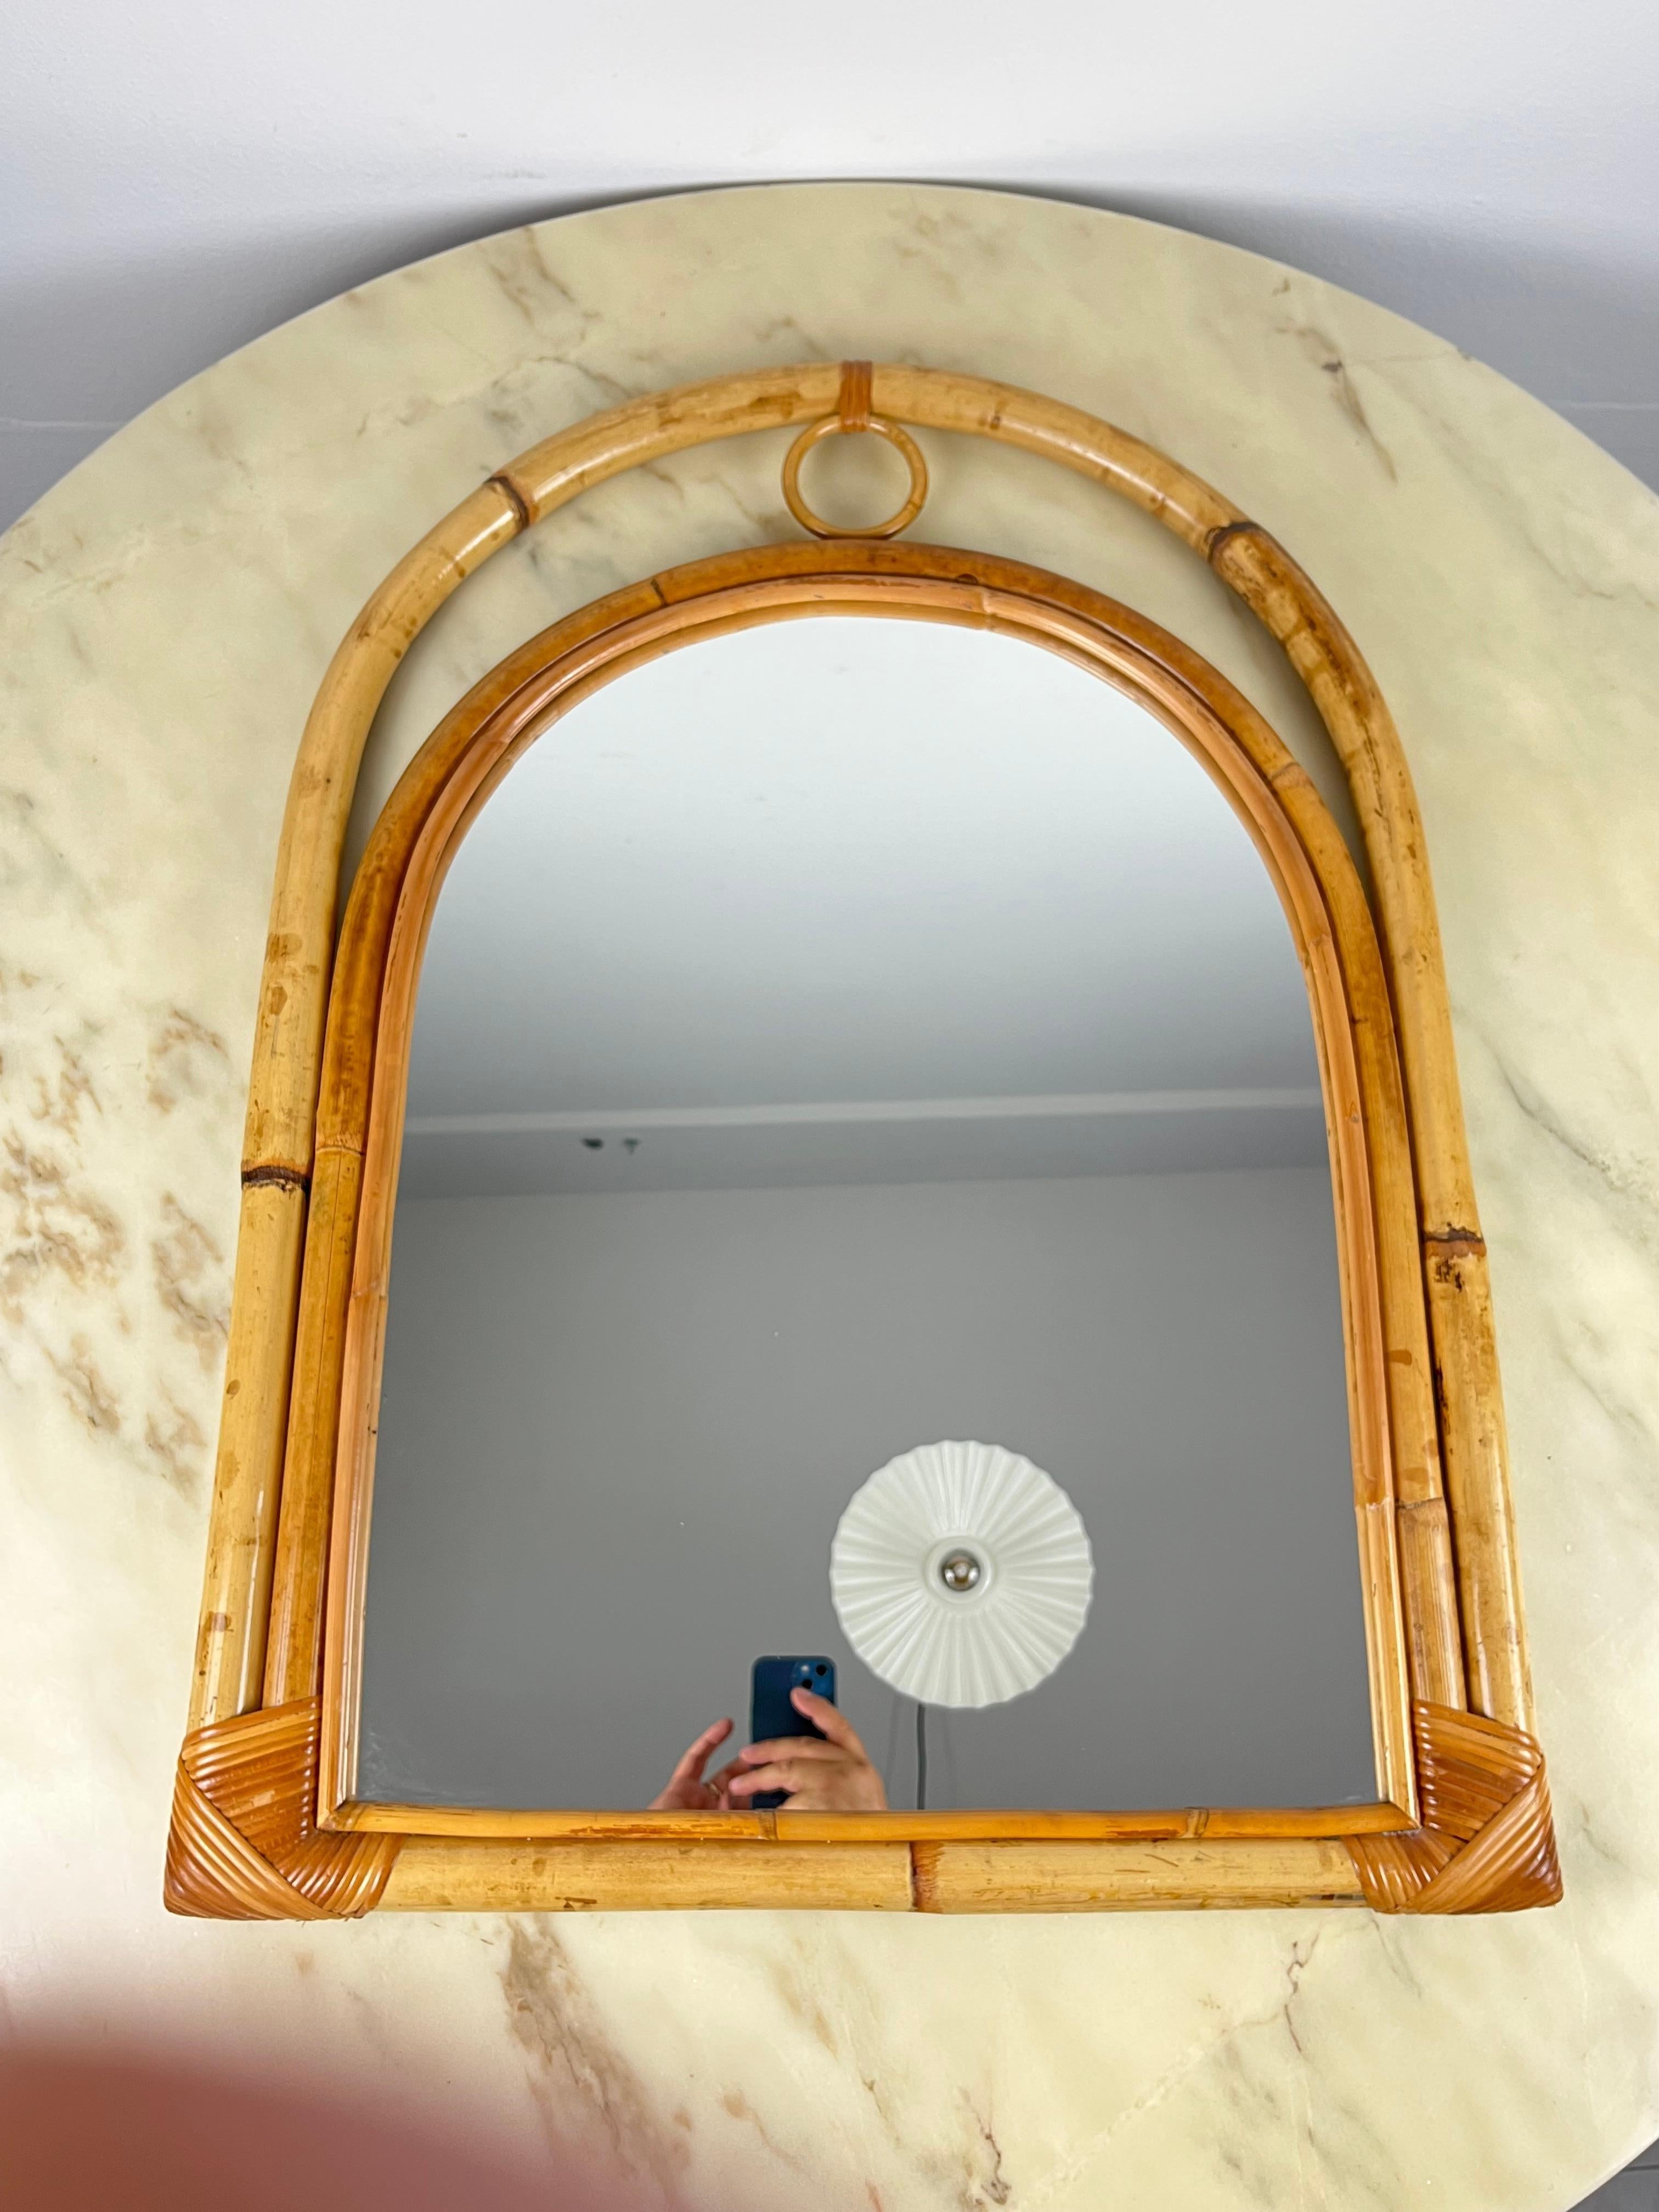 Bamboo Italian  arch mirror, attributed to Vittorio Bonacina, 1970s
Found in a villa in Taormina, a Sicilian seaside resort. It is in excellent condition, with very small signs of aging.